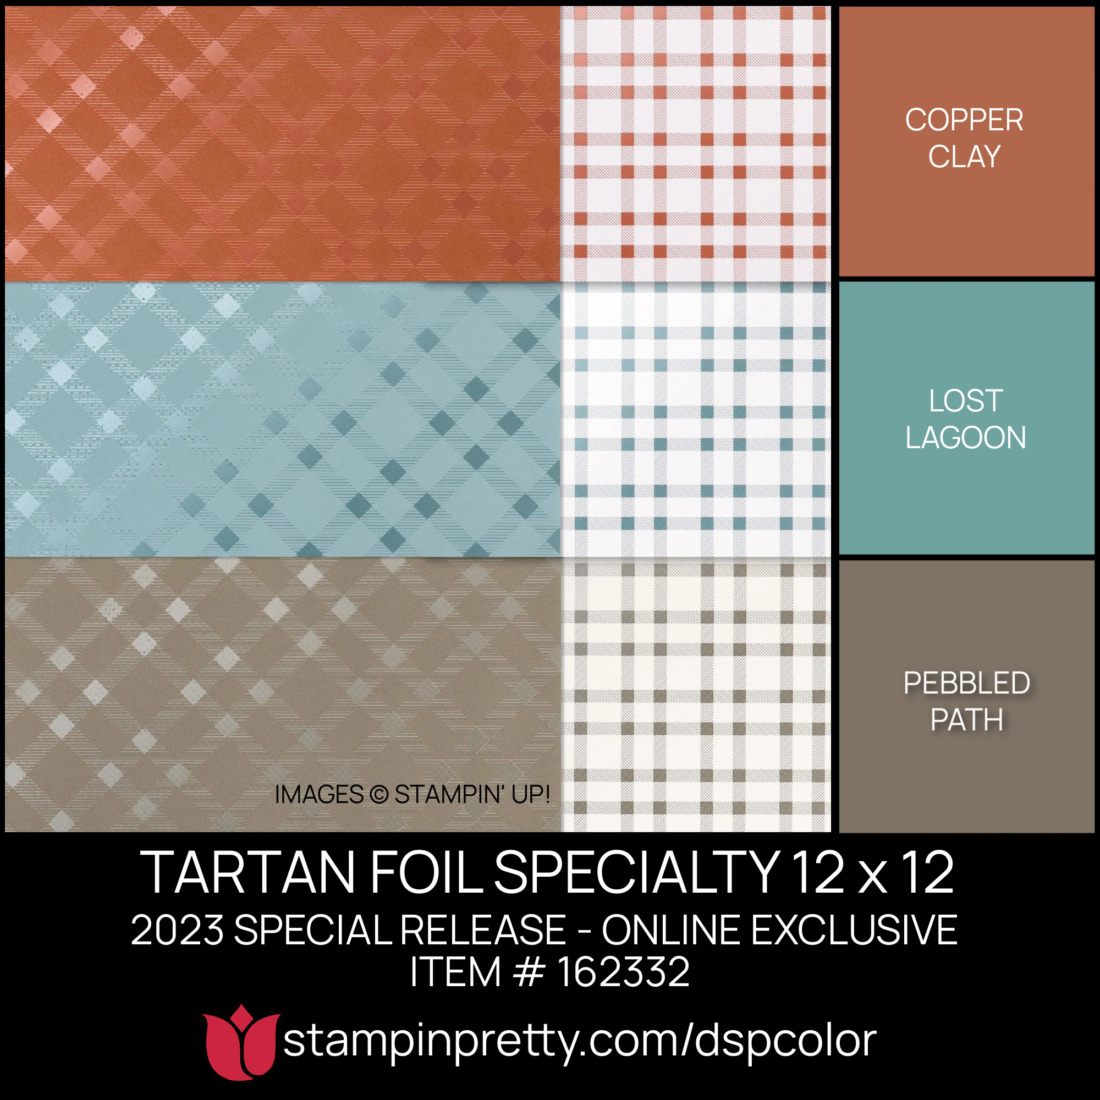 TARTAN FOIL SPECIALTY 12 x 12 Coordinating Colors 162332 Stampin' Pretty Mary Fish Shop Online 24-7